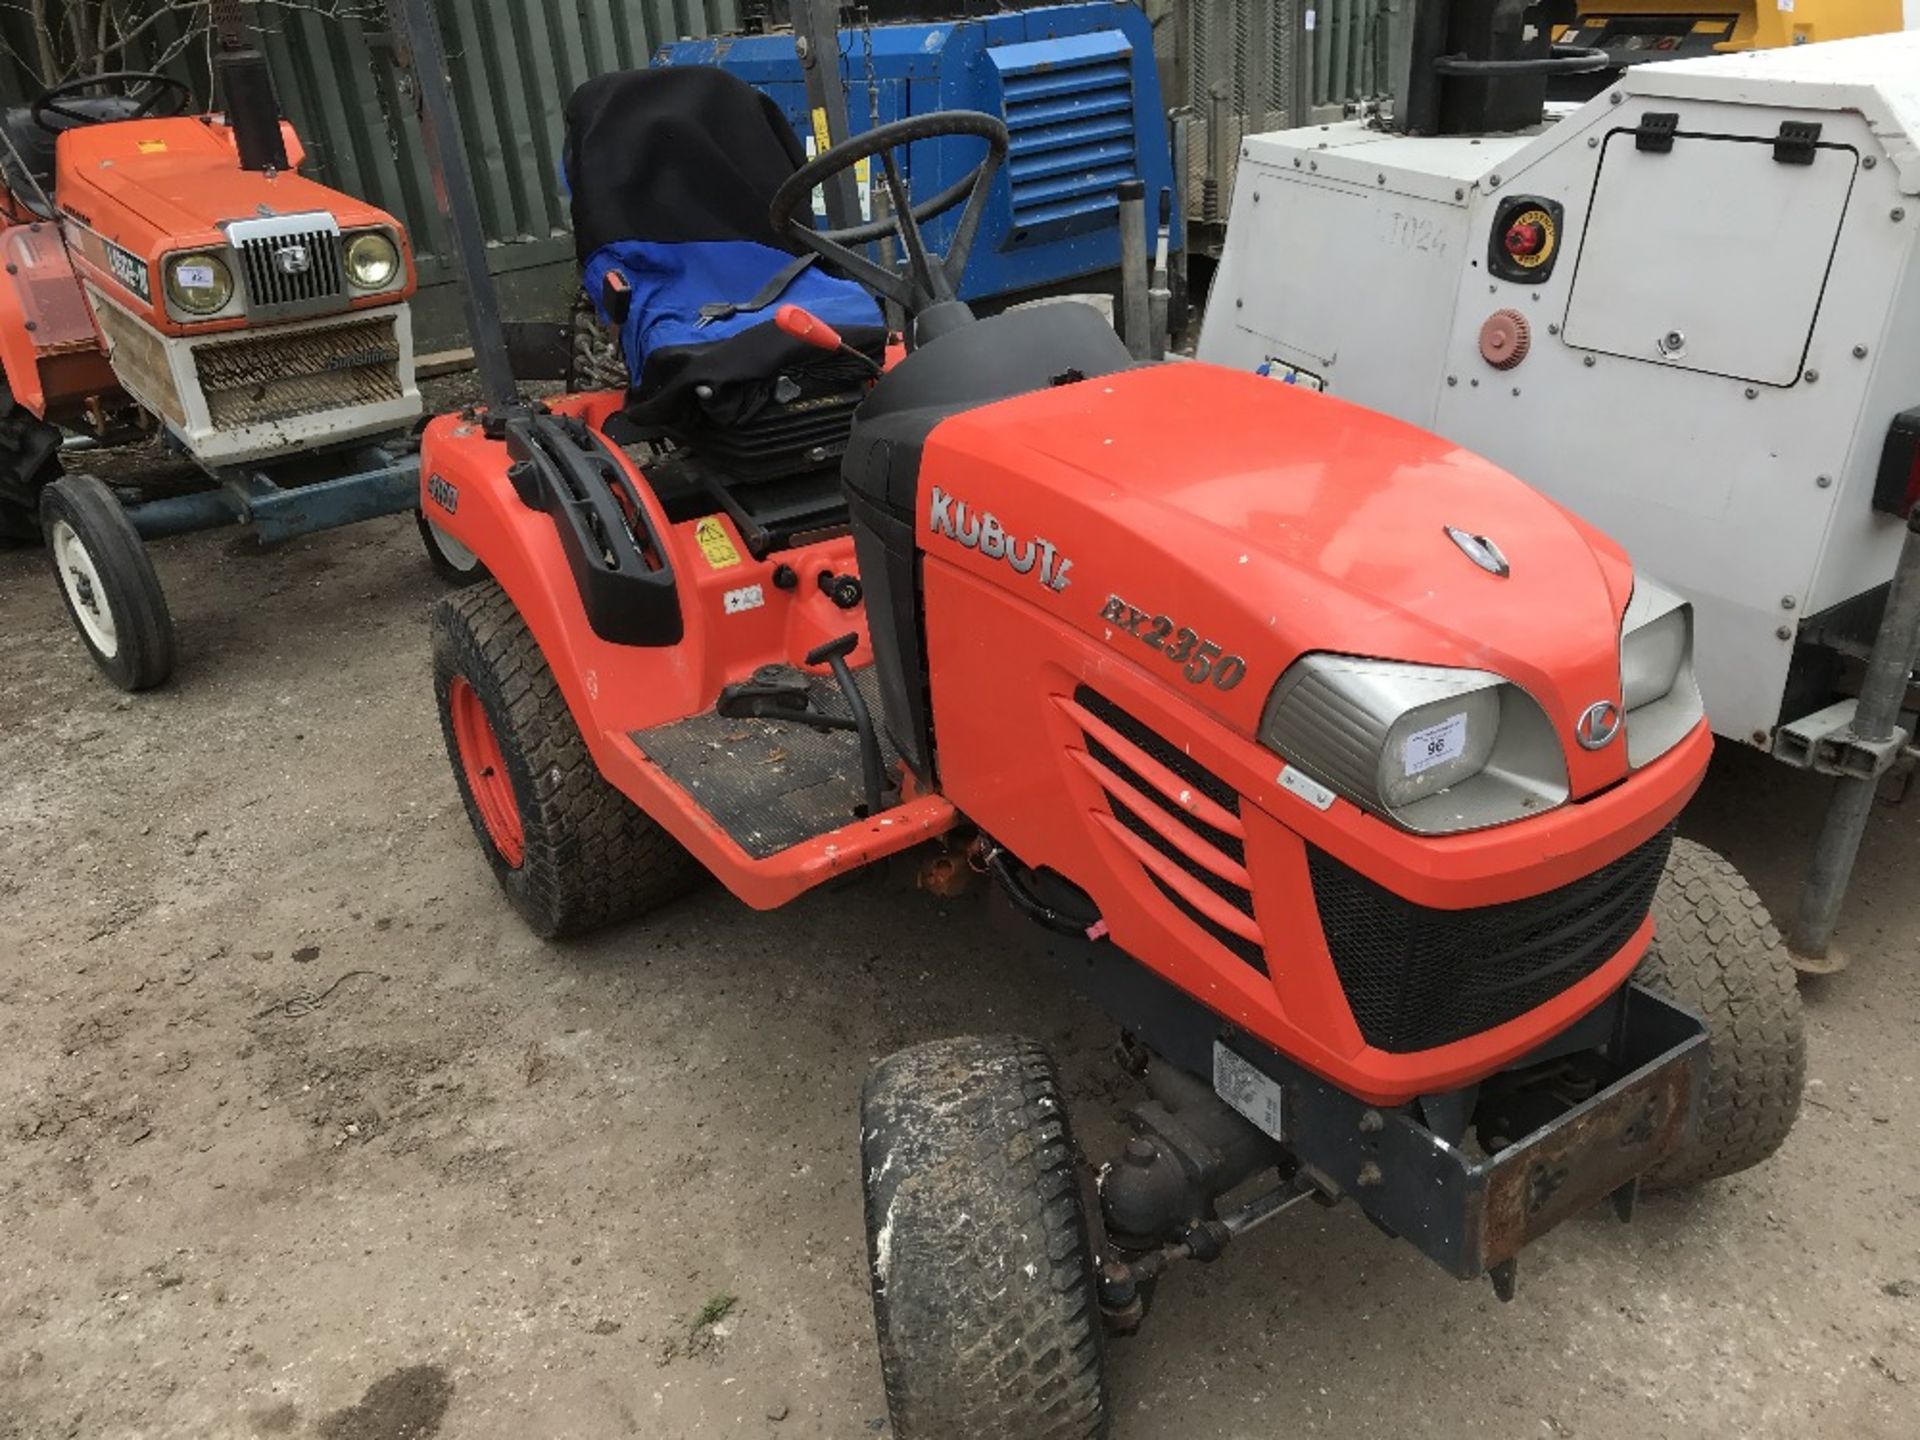 Kubota BX2350 4wd compact tractor, yr2014 build, SN: 76921 when tested was seen to start, drive